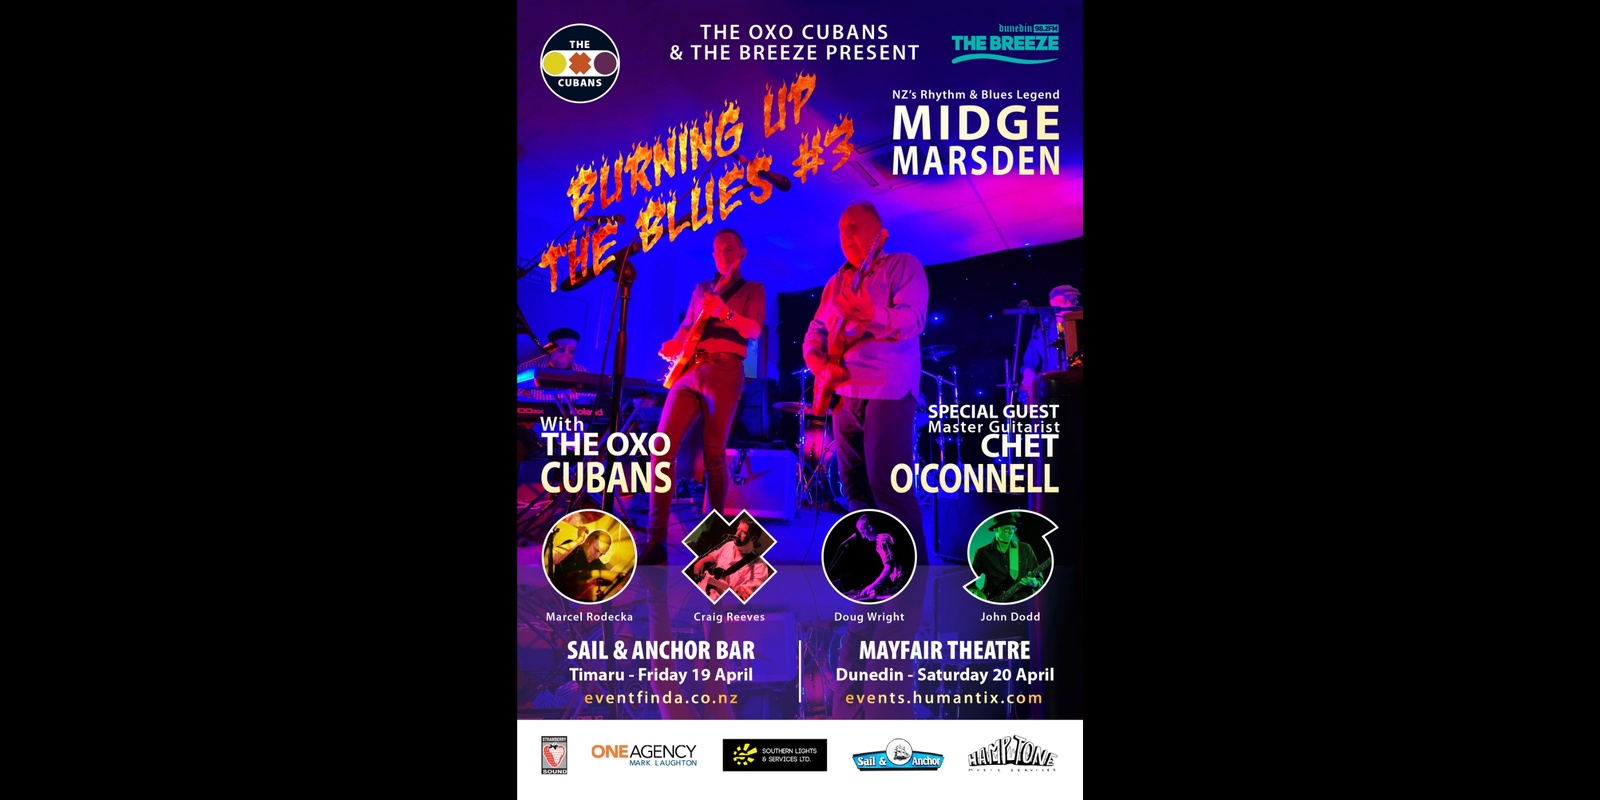 Banner image for MIDGE MARSDEN, THE OXO CUBANS & CHET O'CONNELL .. "BURNING UP THE BLUES #3"  